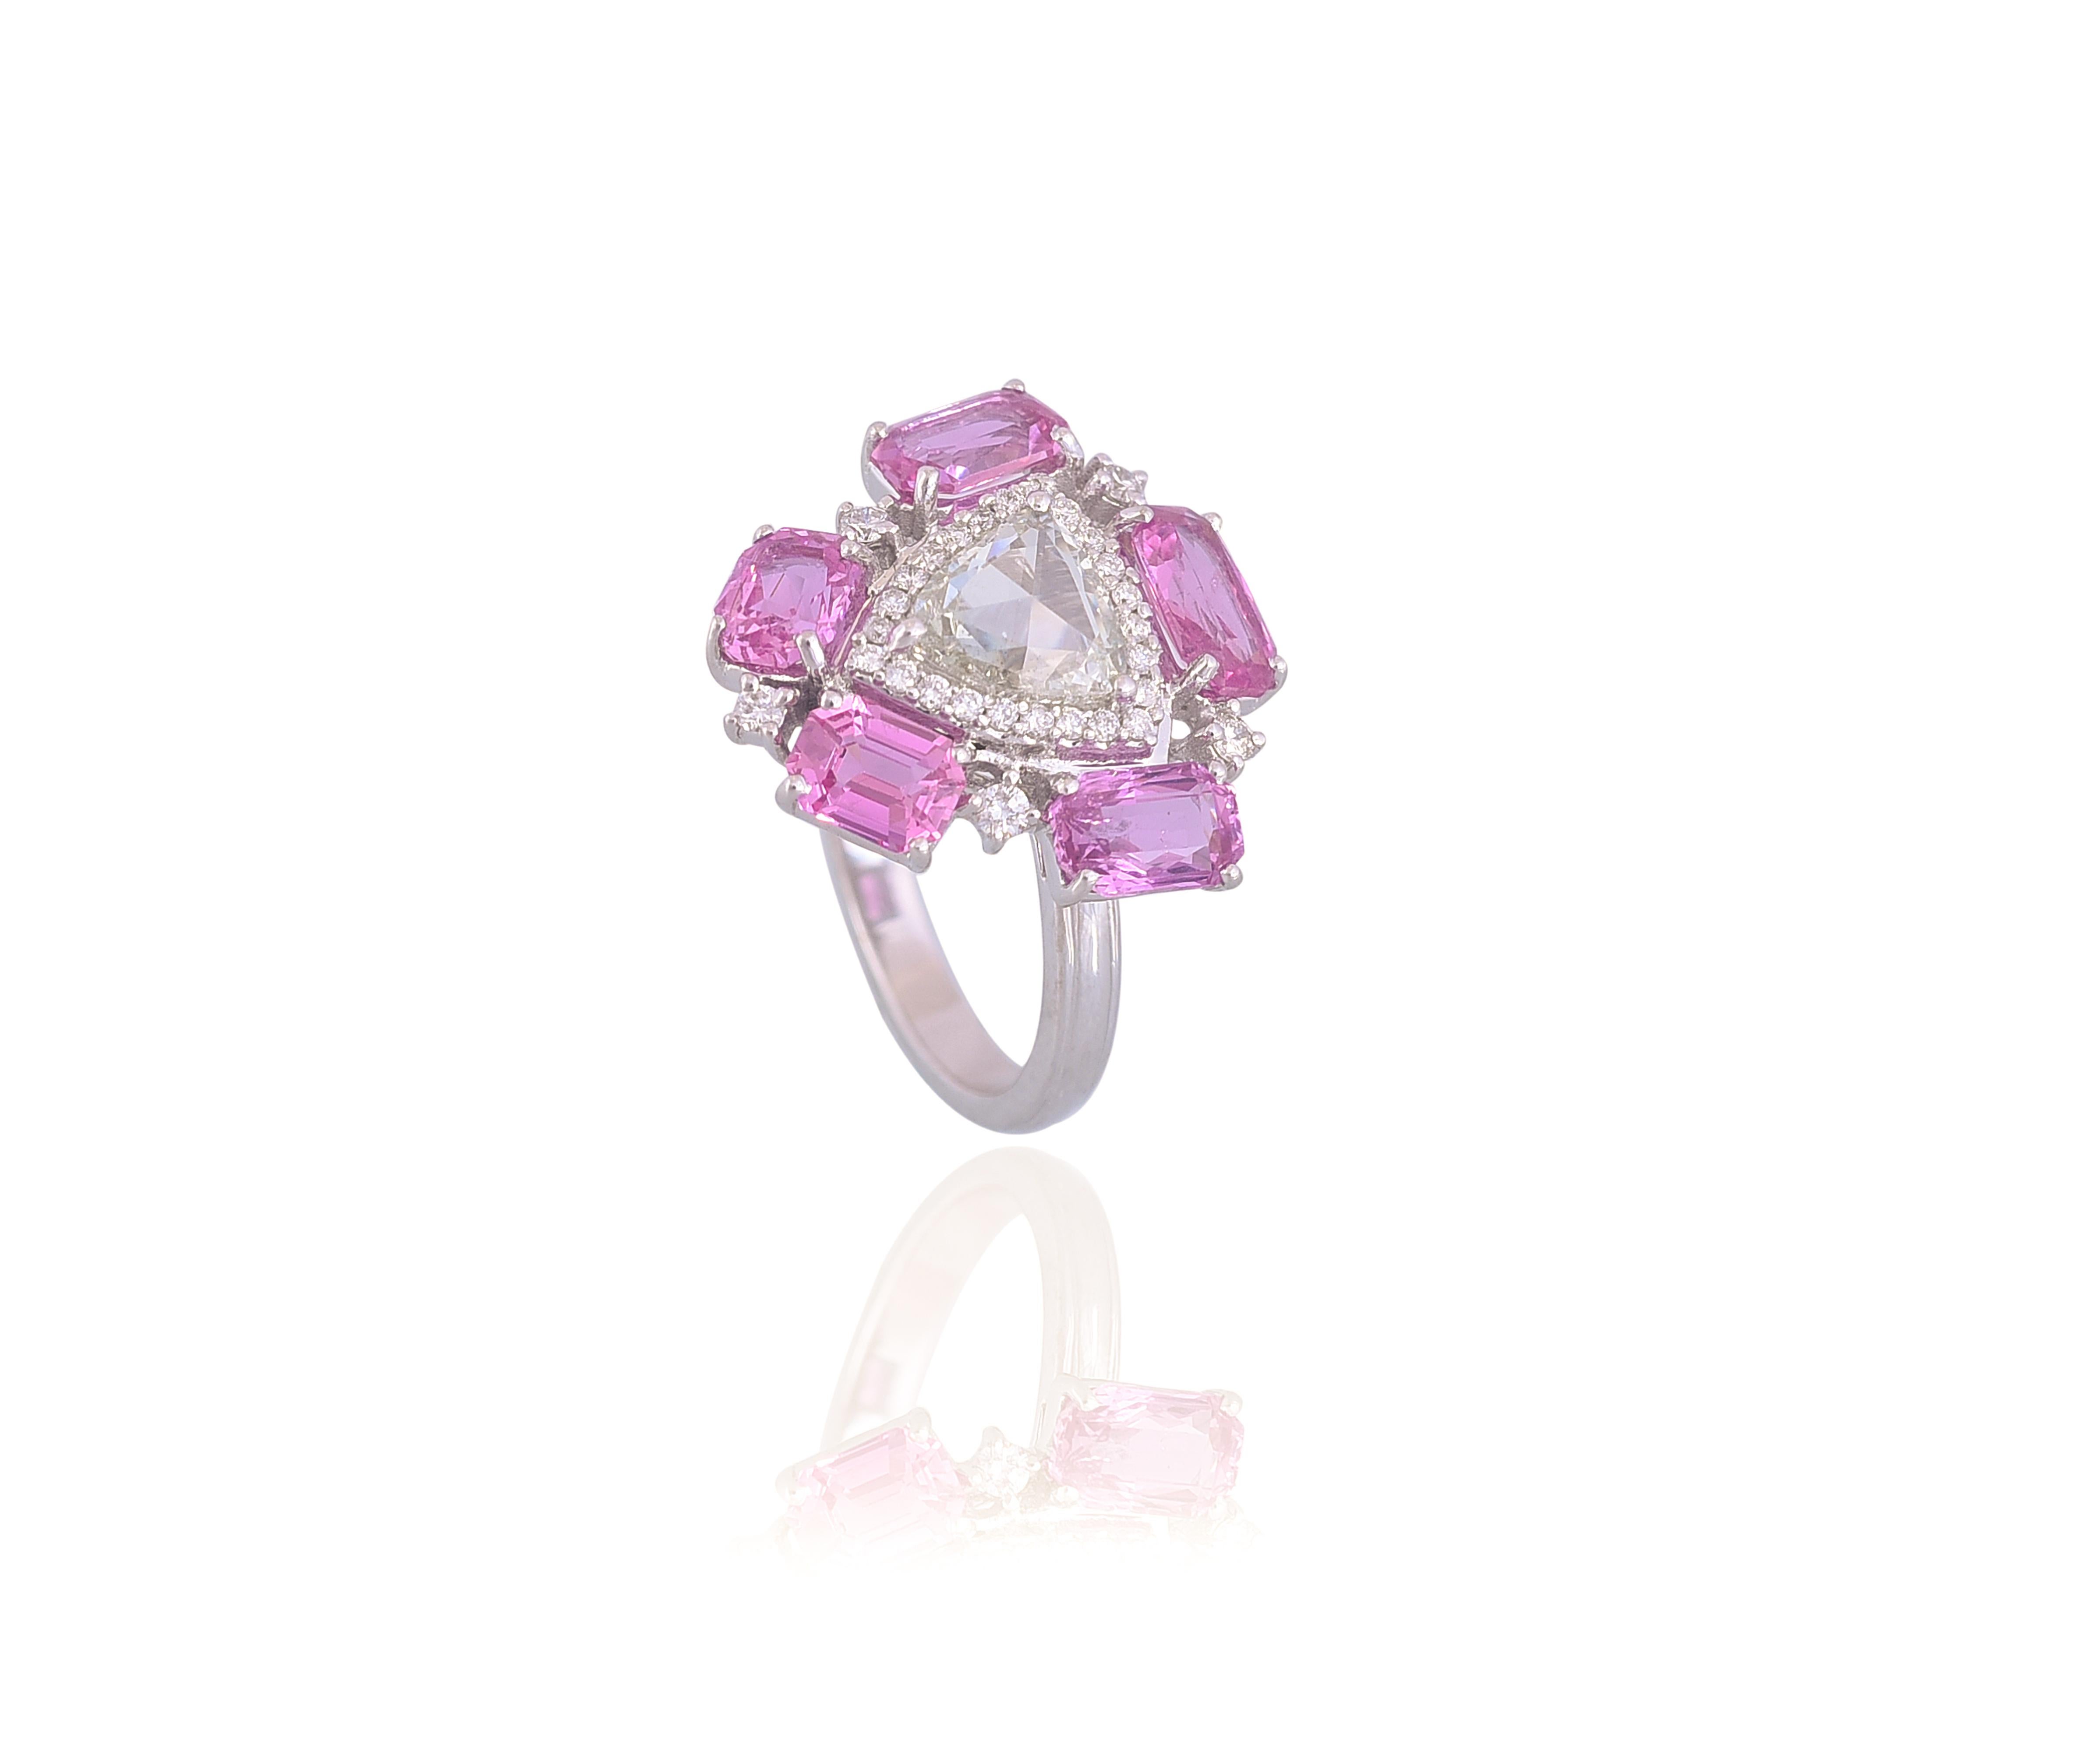 A gorgeous and very apt for the holidays Pink Sapphire & Rose Cut Diamonds cocktail ring set in 18K gold & Diamonds. The combined weight of the diamonds is 1.09 carats. The weight of the Pink Sapphires is 3.29 carats. The Pink Sapphires are natural,